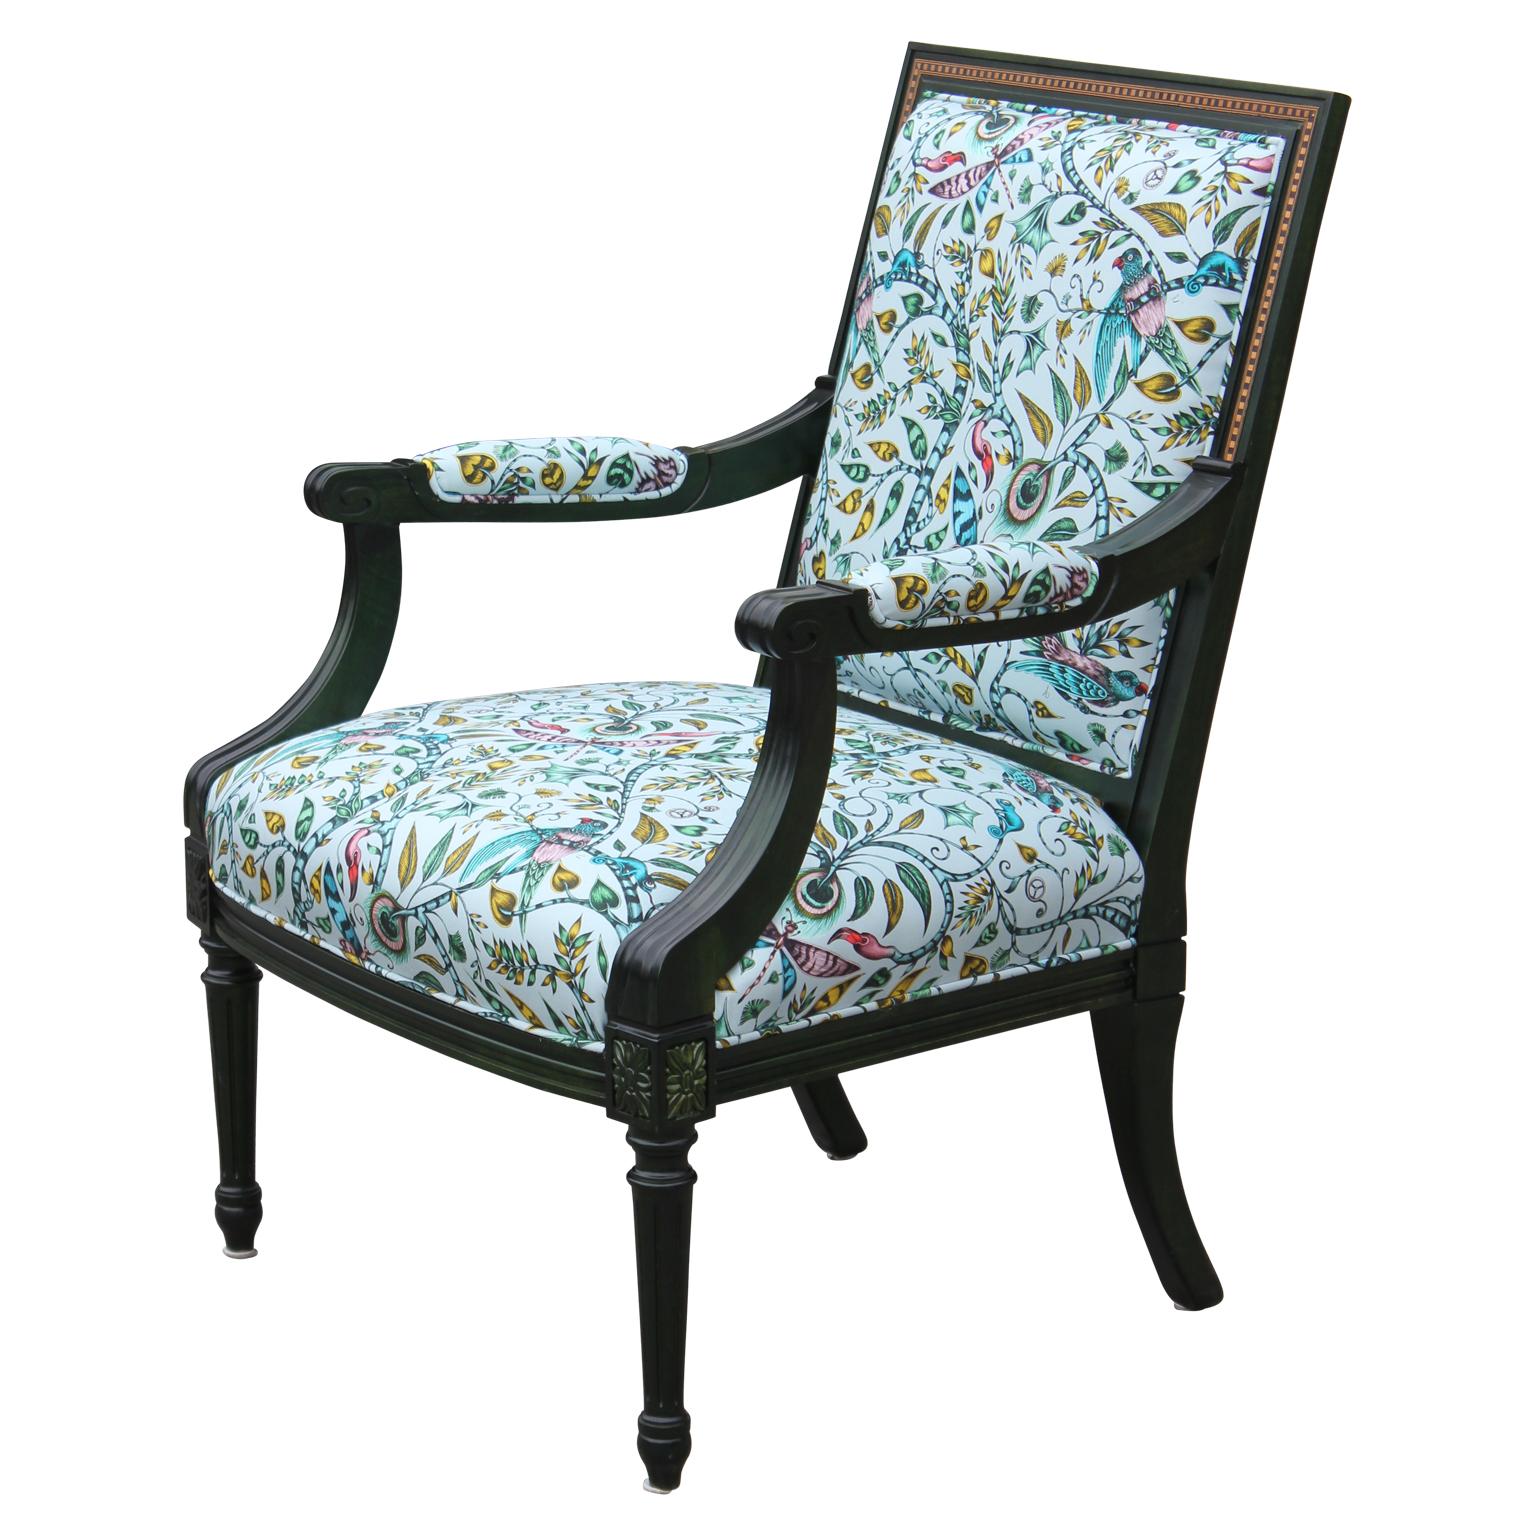 French Provincial Custom Green Dyed French Armchair with Tropical Animalia Upholstery